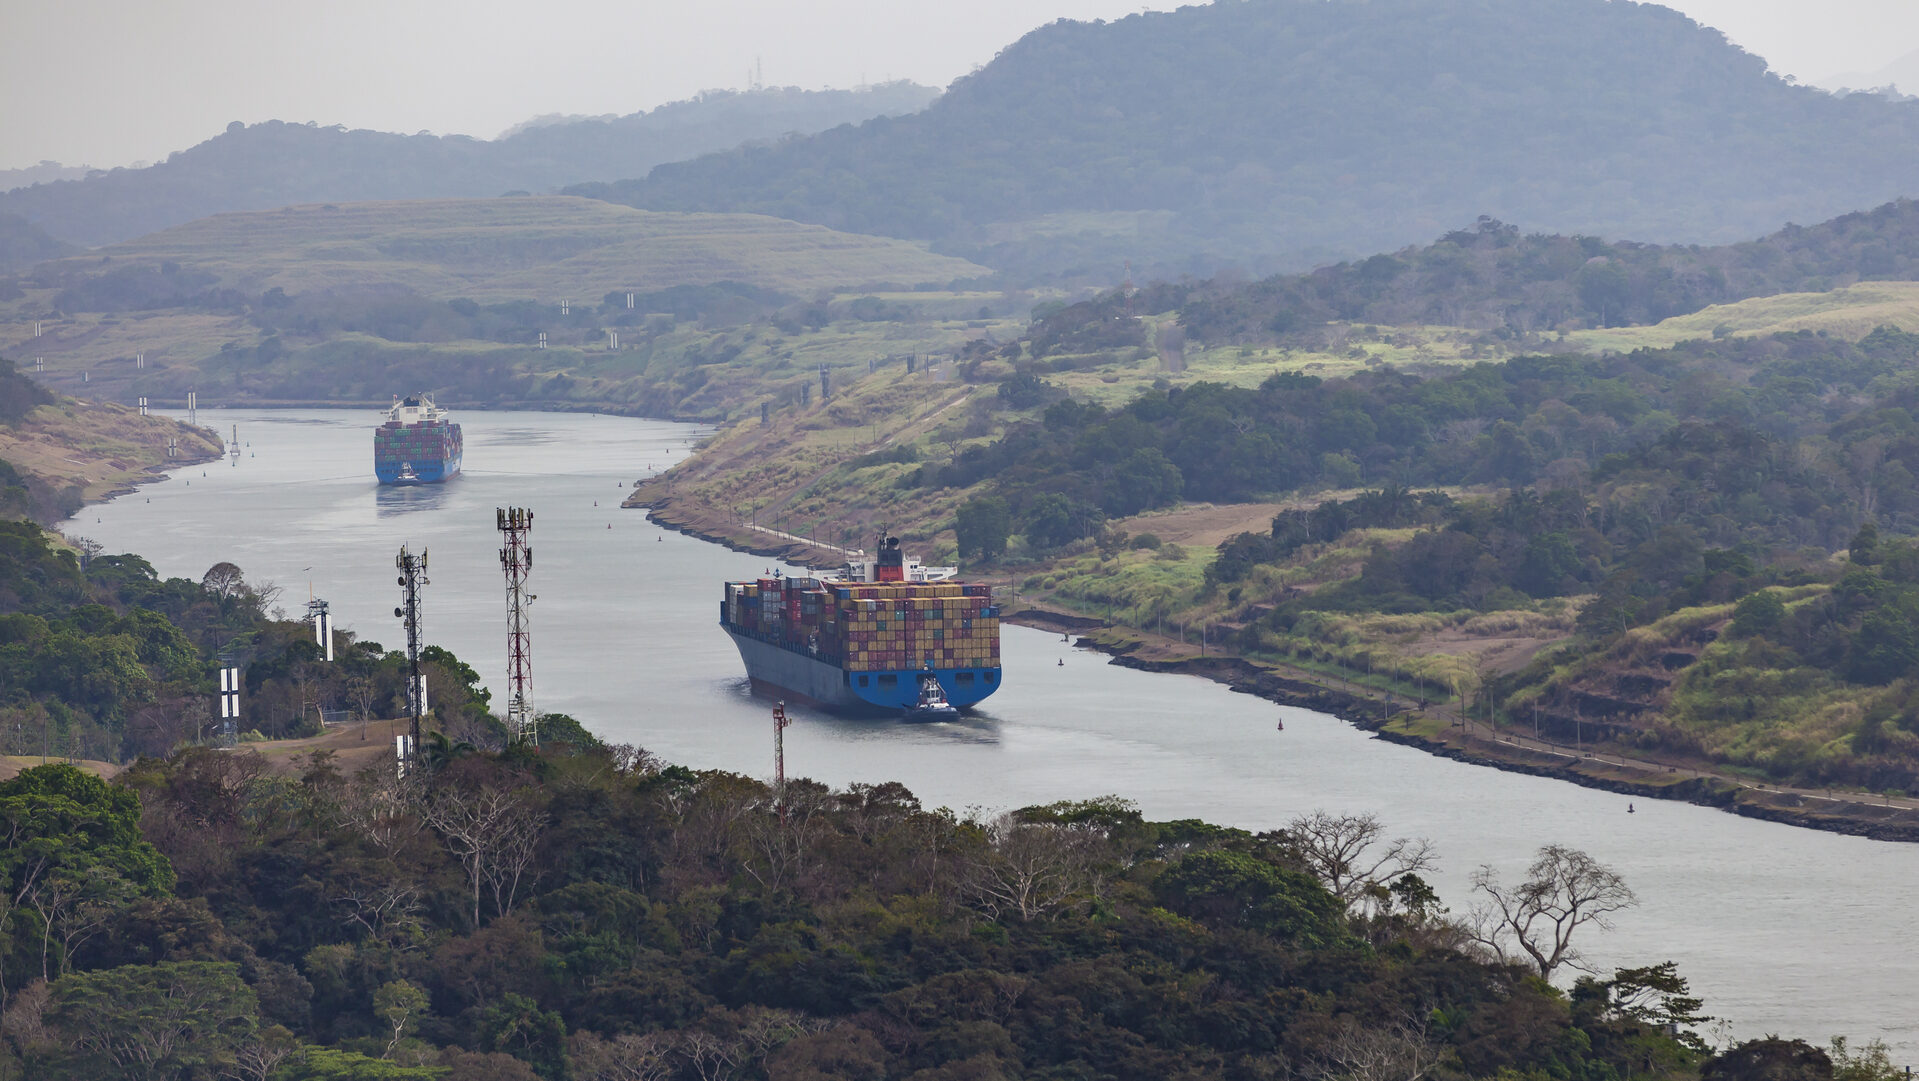 The Panama Canal is running dry, sending global shipping into chaos (again)